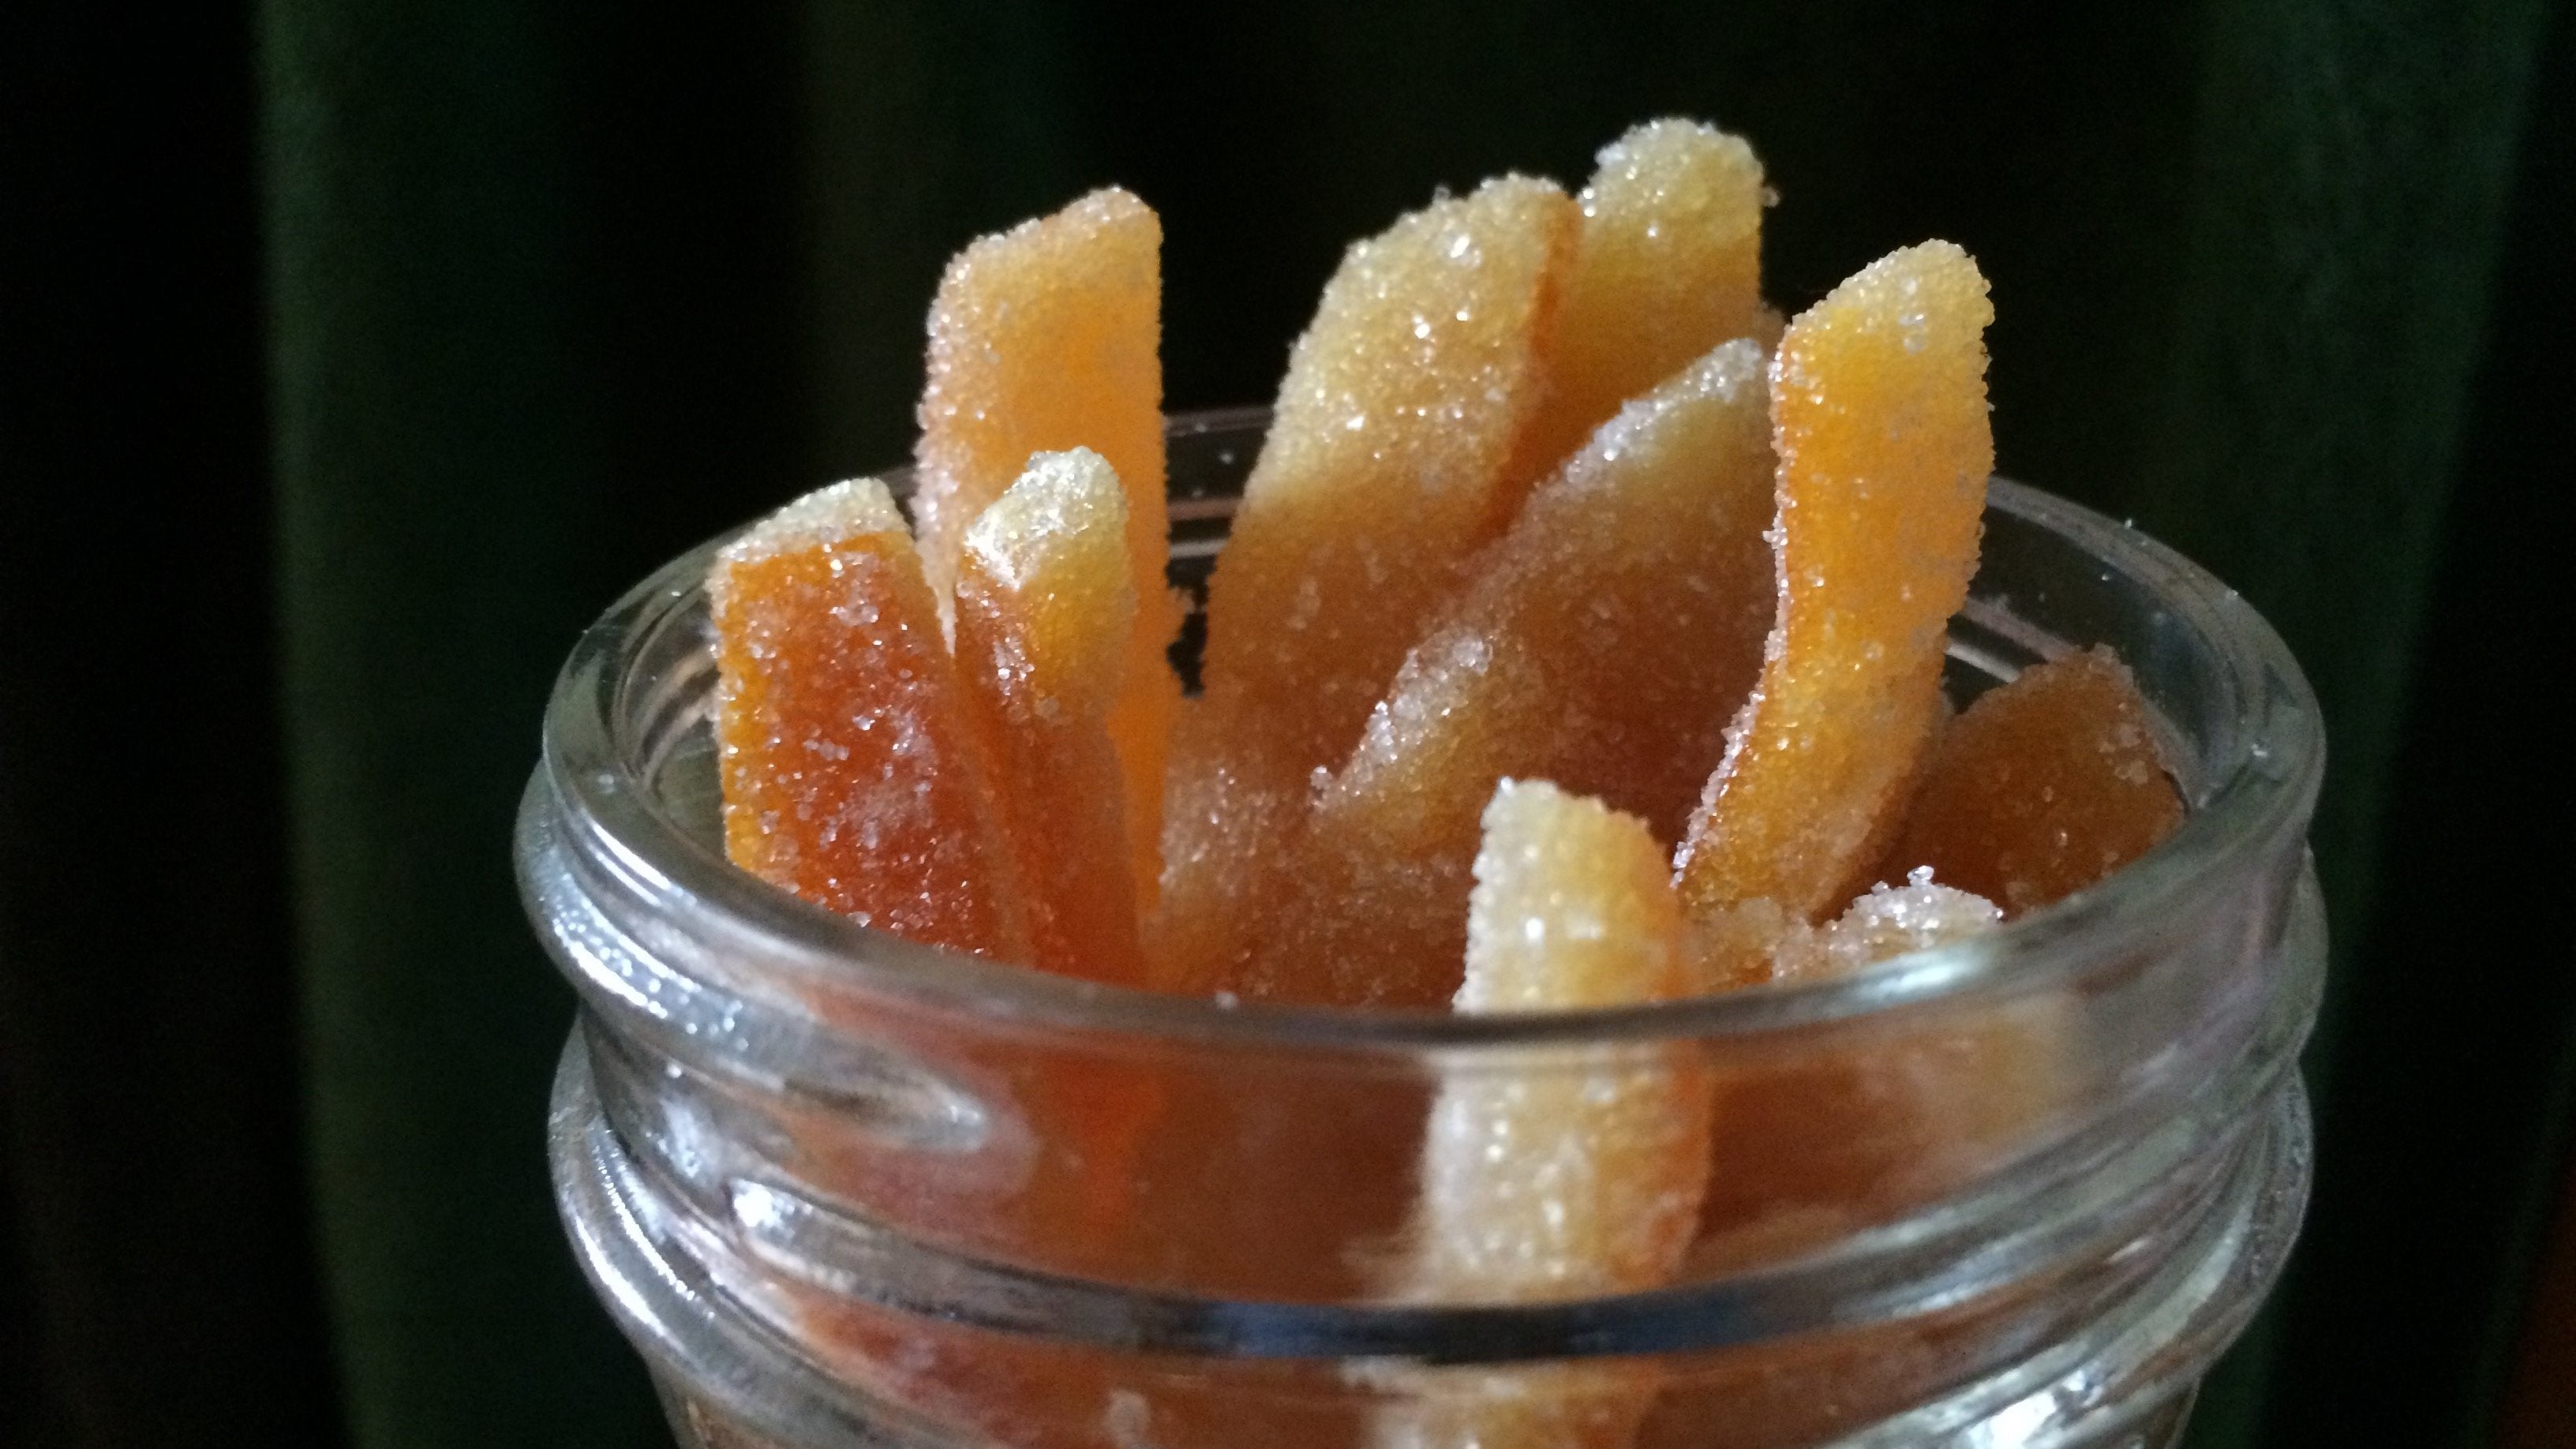 Orangette Is A Slice Of Sunshine In Candied Form